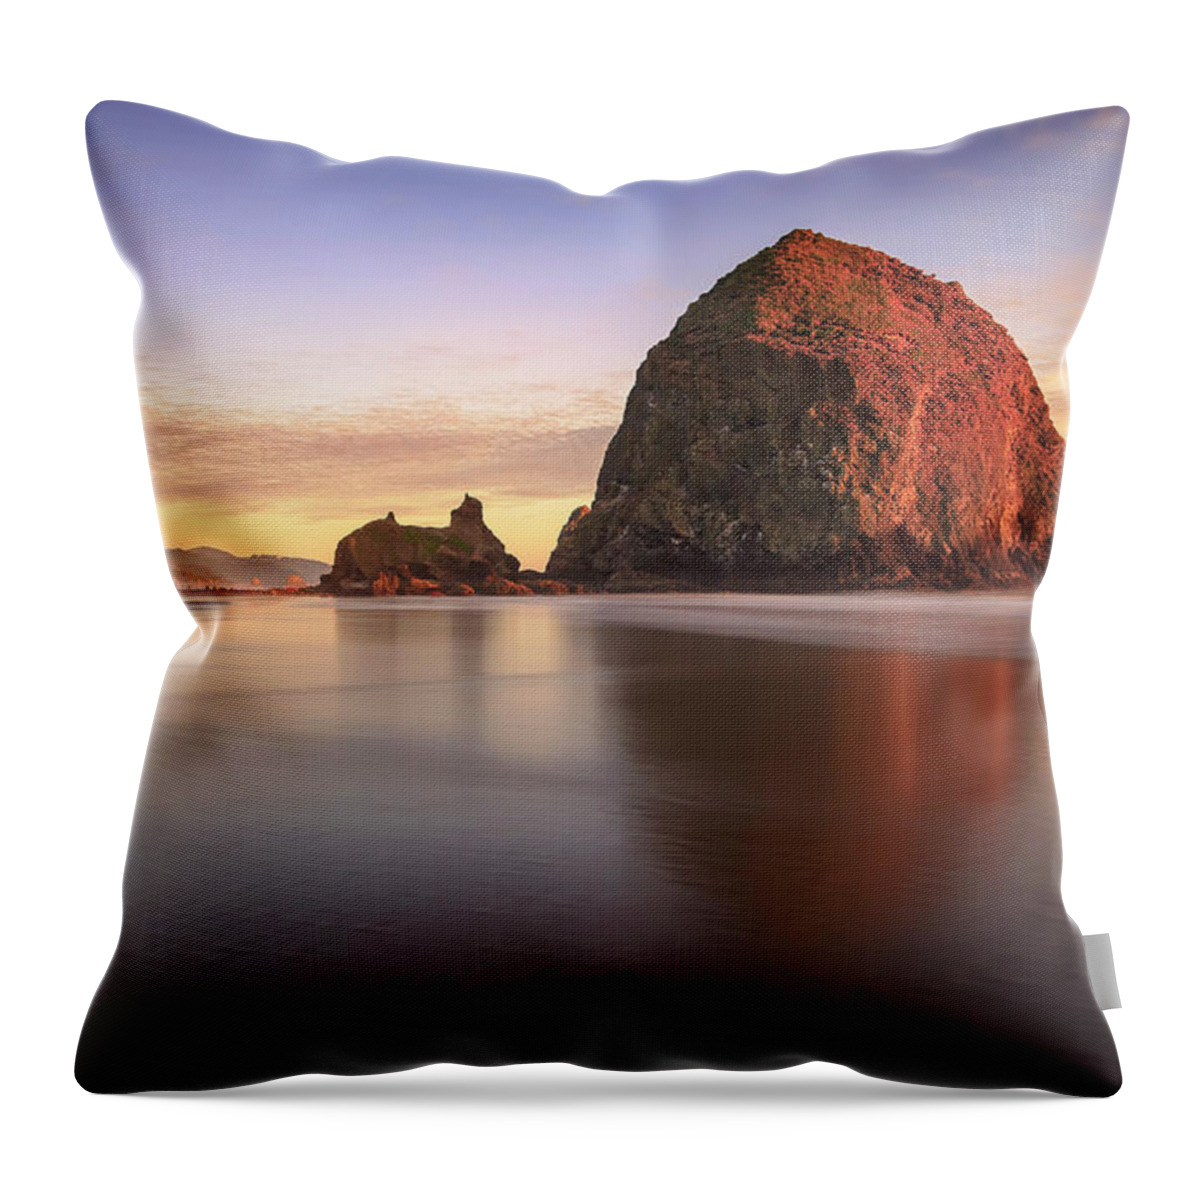 3scape Throw Pillow featuring the photograph Haystack Rock Sunset by Adam Romanowicz